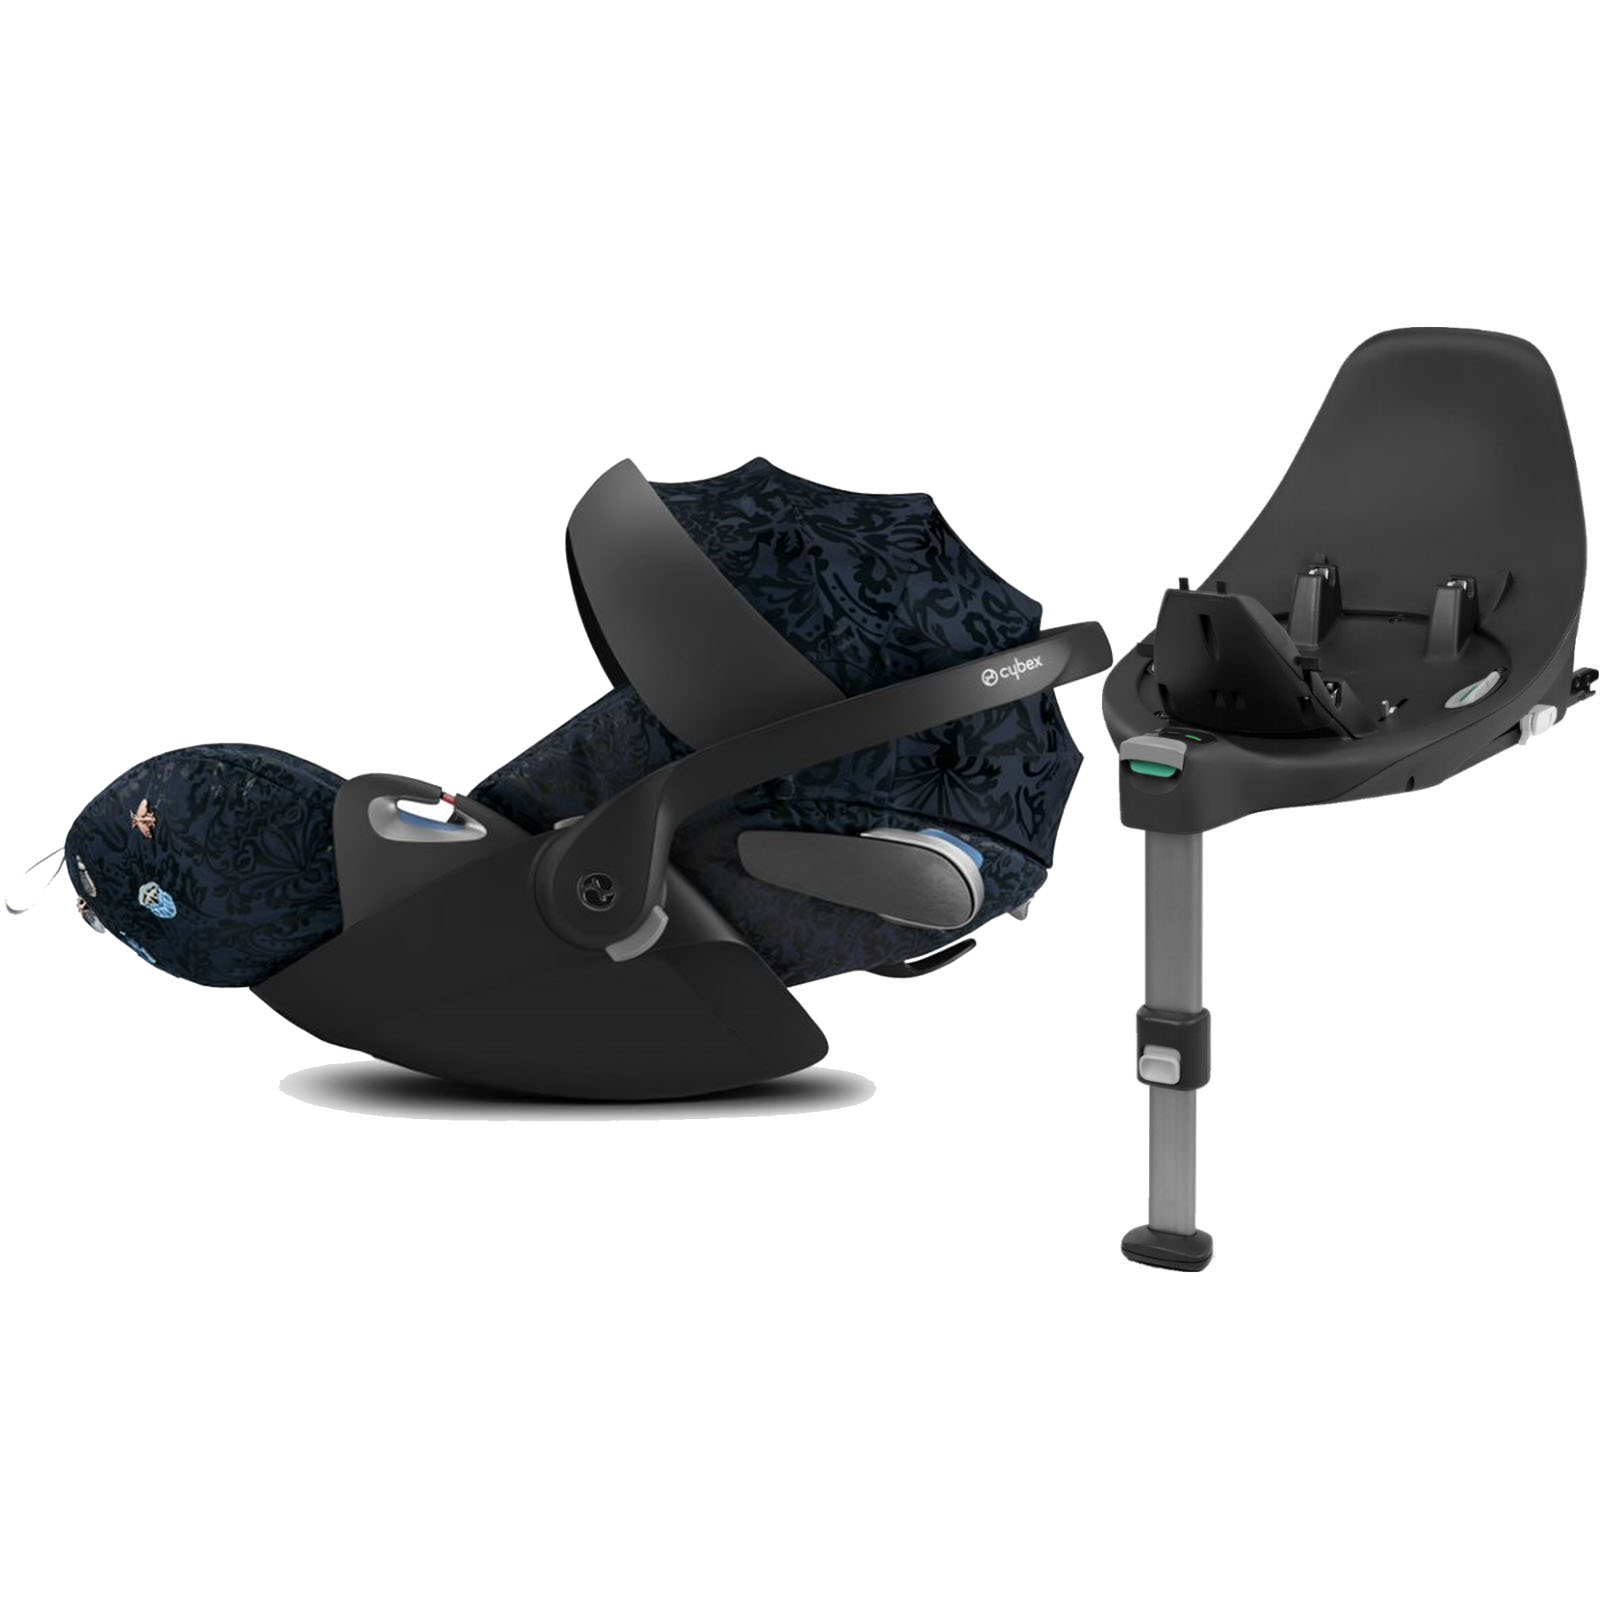 Cybex Cloud Z i-Size Lie-Flat Infant Car Seat with ISOFIX Base - Jewels of Nature Edition Blue